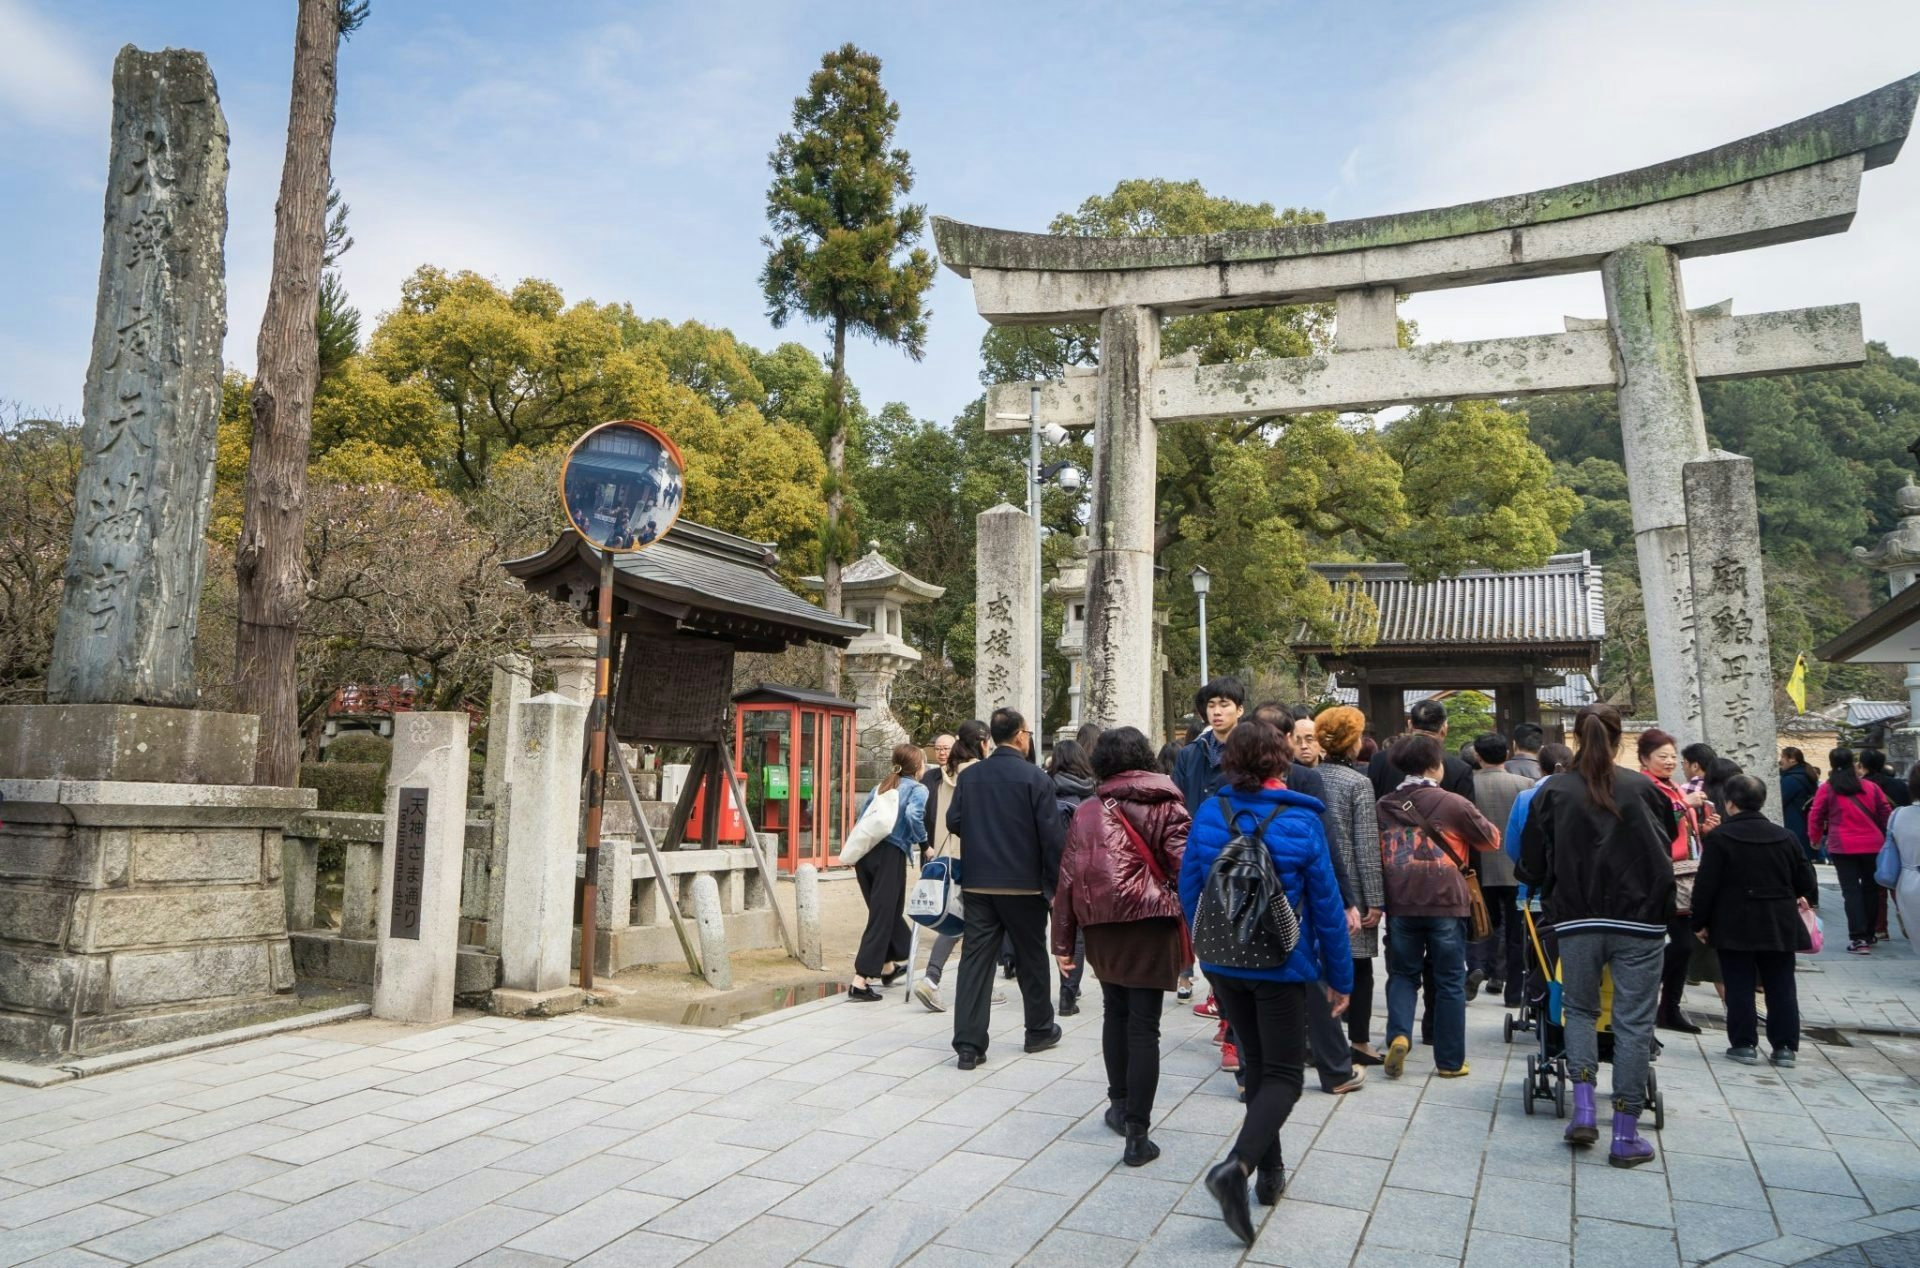 Chinese tourists at the Daizaifu Shinto shrine in Fukuoka. Alipay is going beyond facilitating Chinese tourist spending in Japan and now hopes to bring a new platform catering to Japanese consumers. Photo: Anutr Yossundara/Shutterstuck